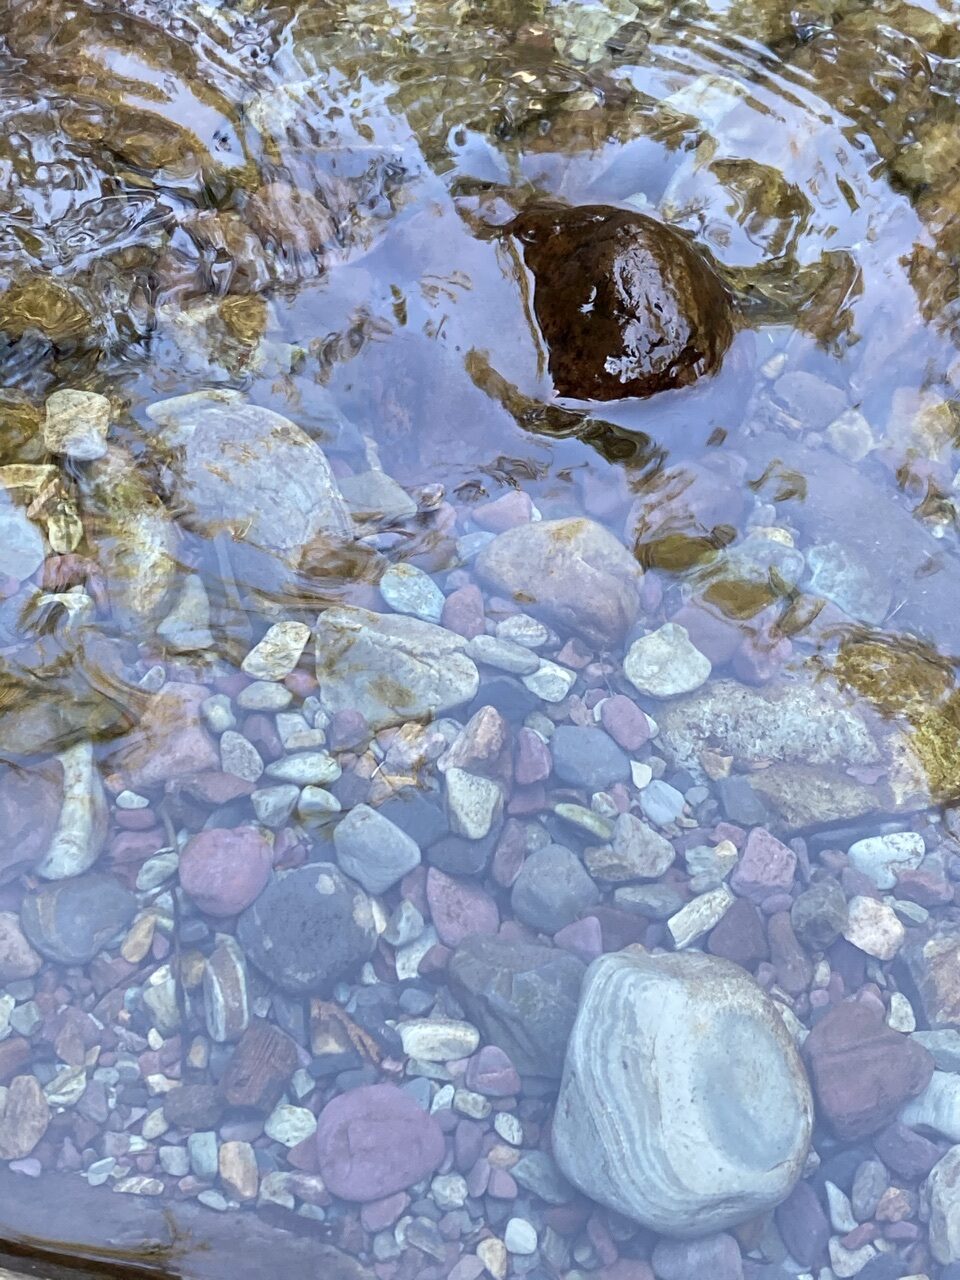 Hidden Mickey Mouse in creek bed made from rocks